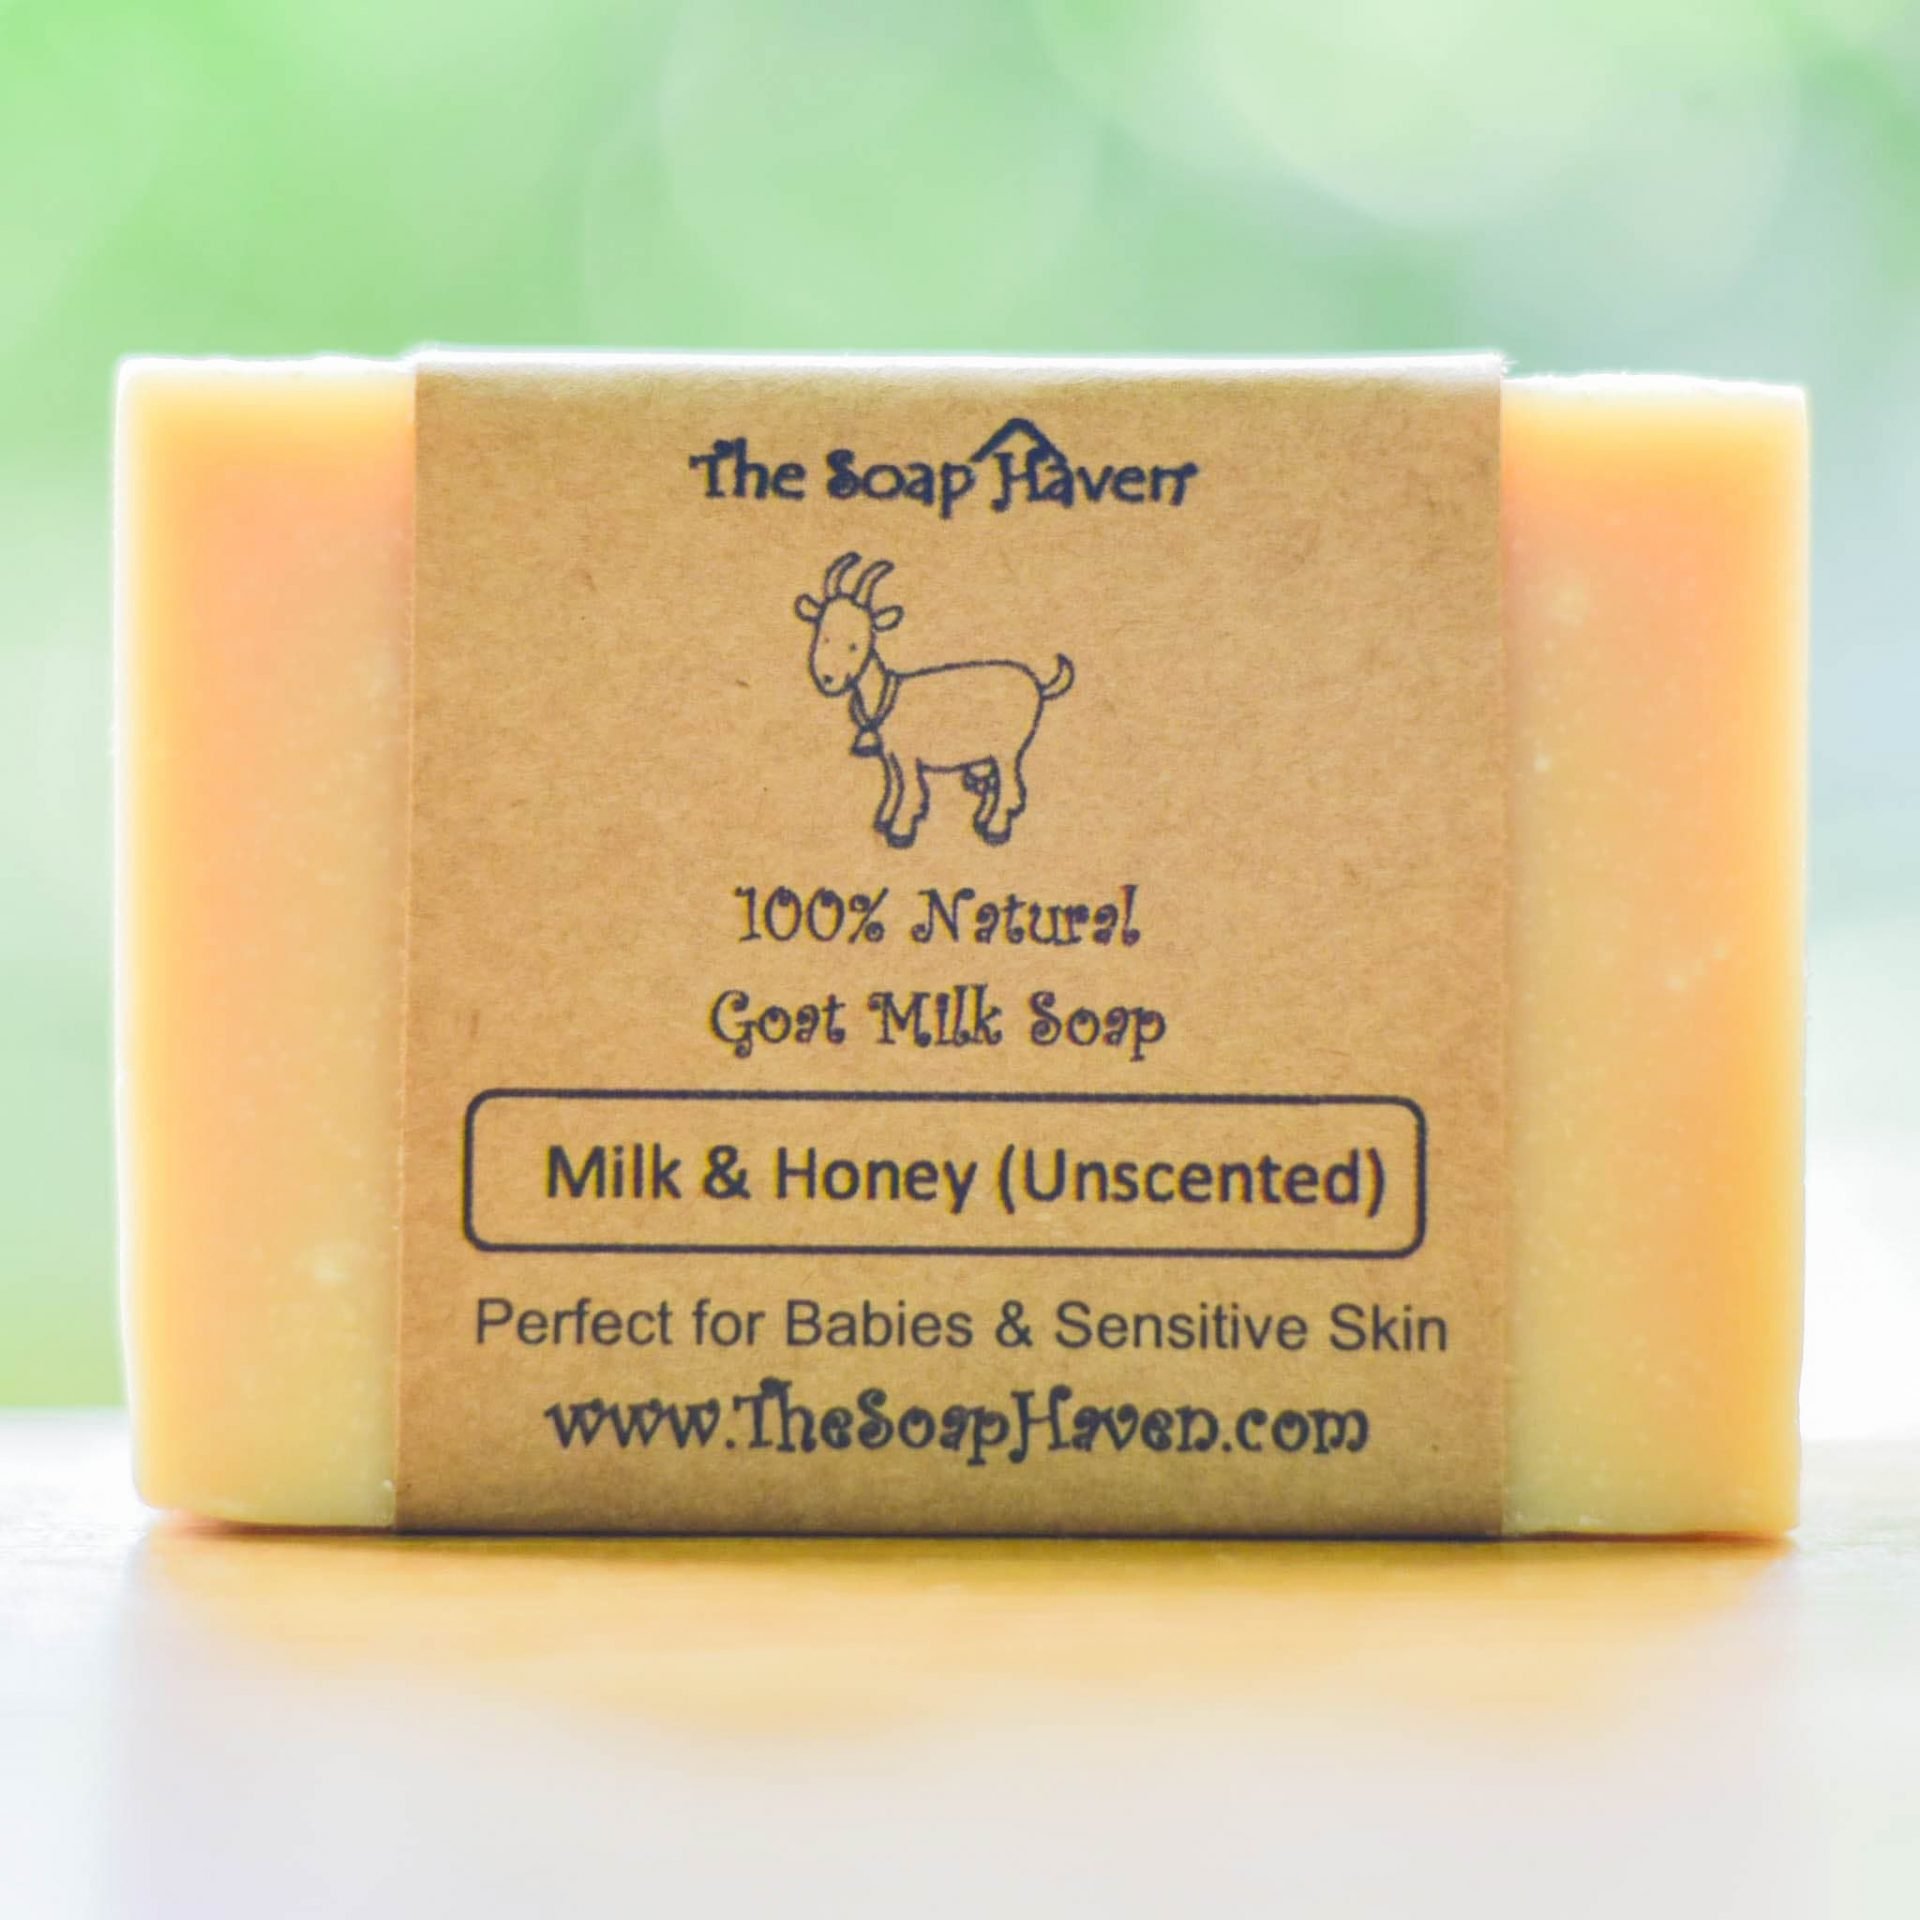 A bar of 100% natural got milk soap, made from milk and honey. This soap is made by The Soap Haven.